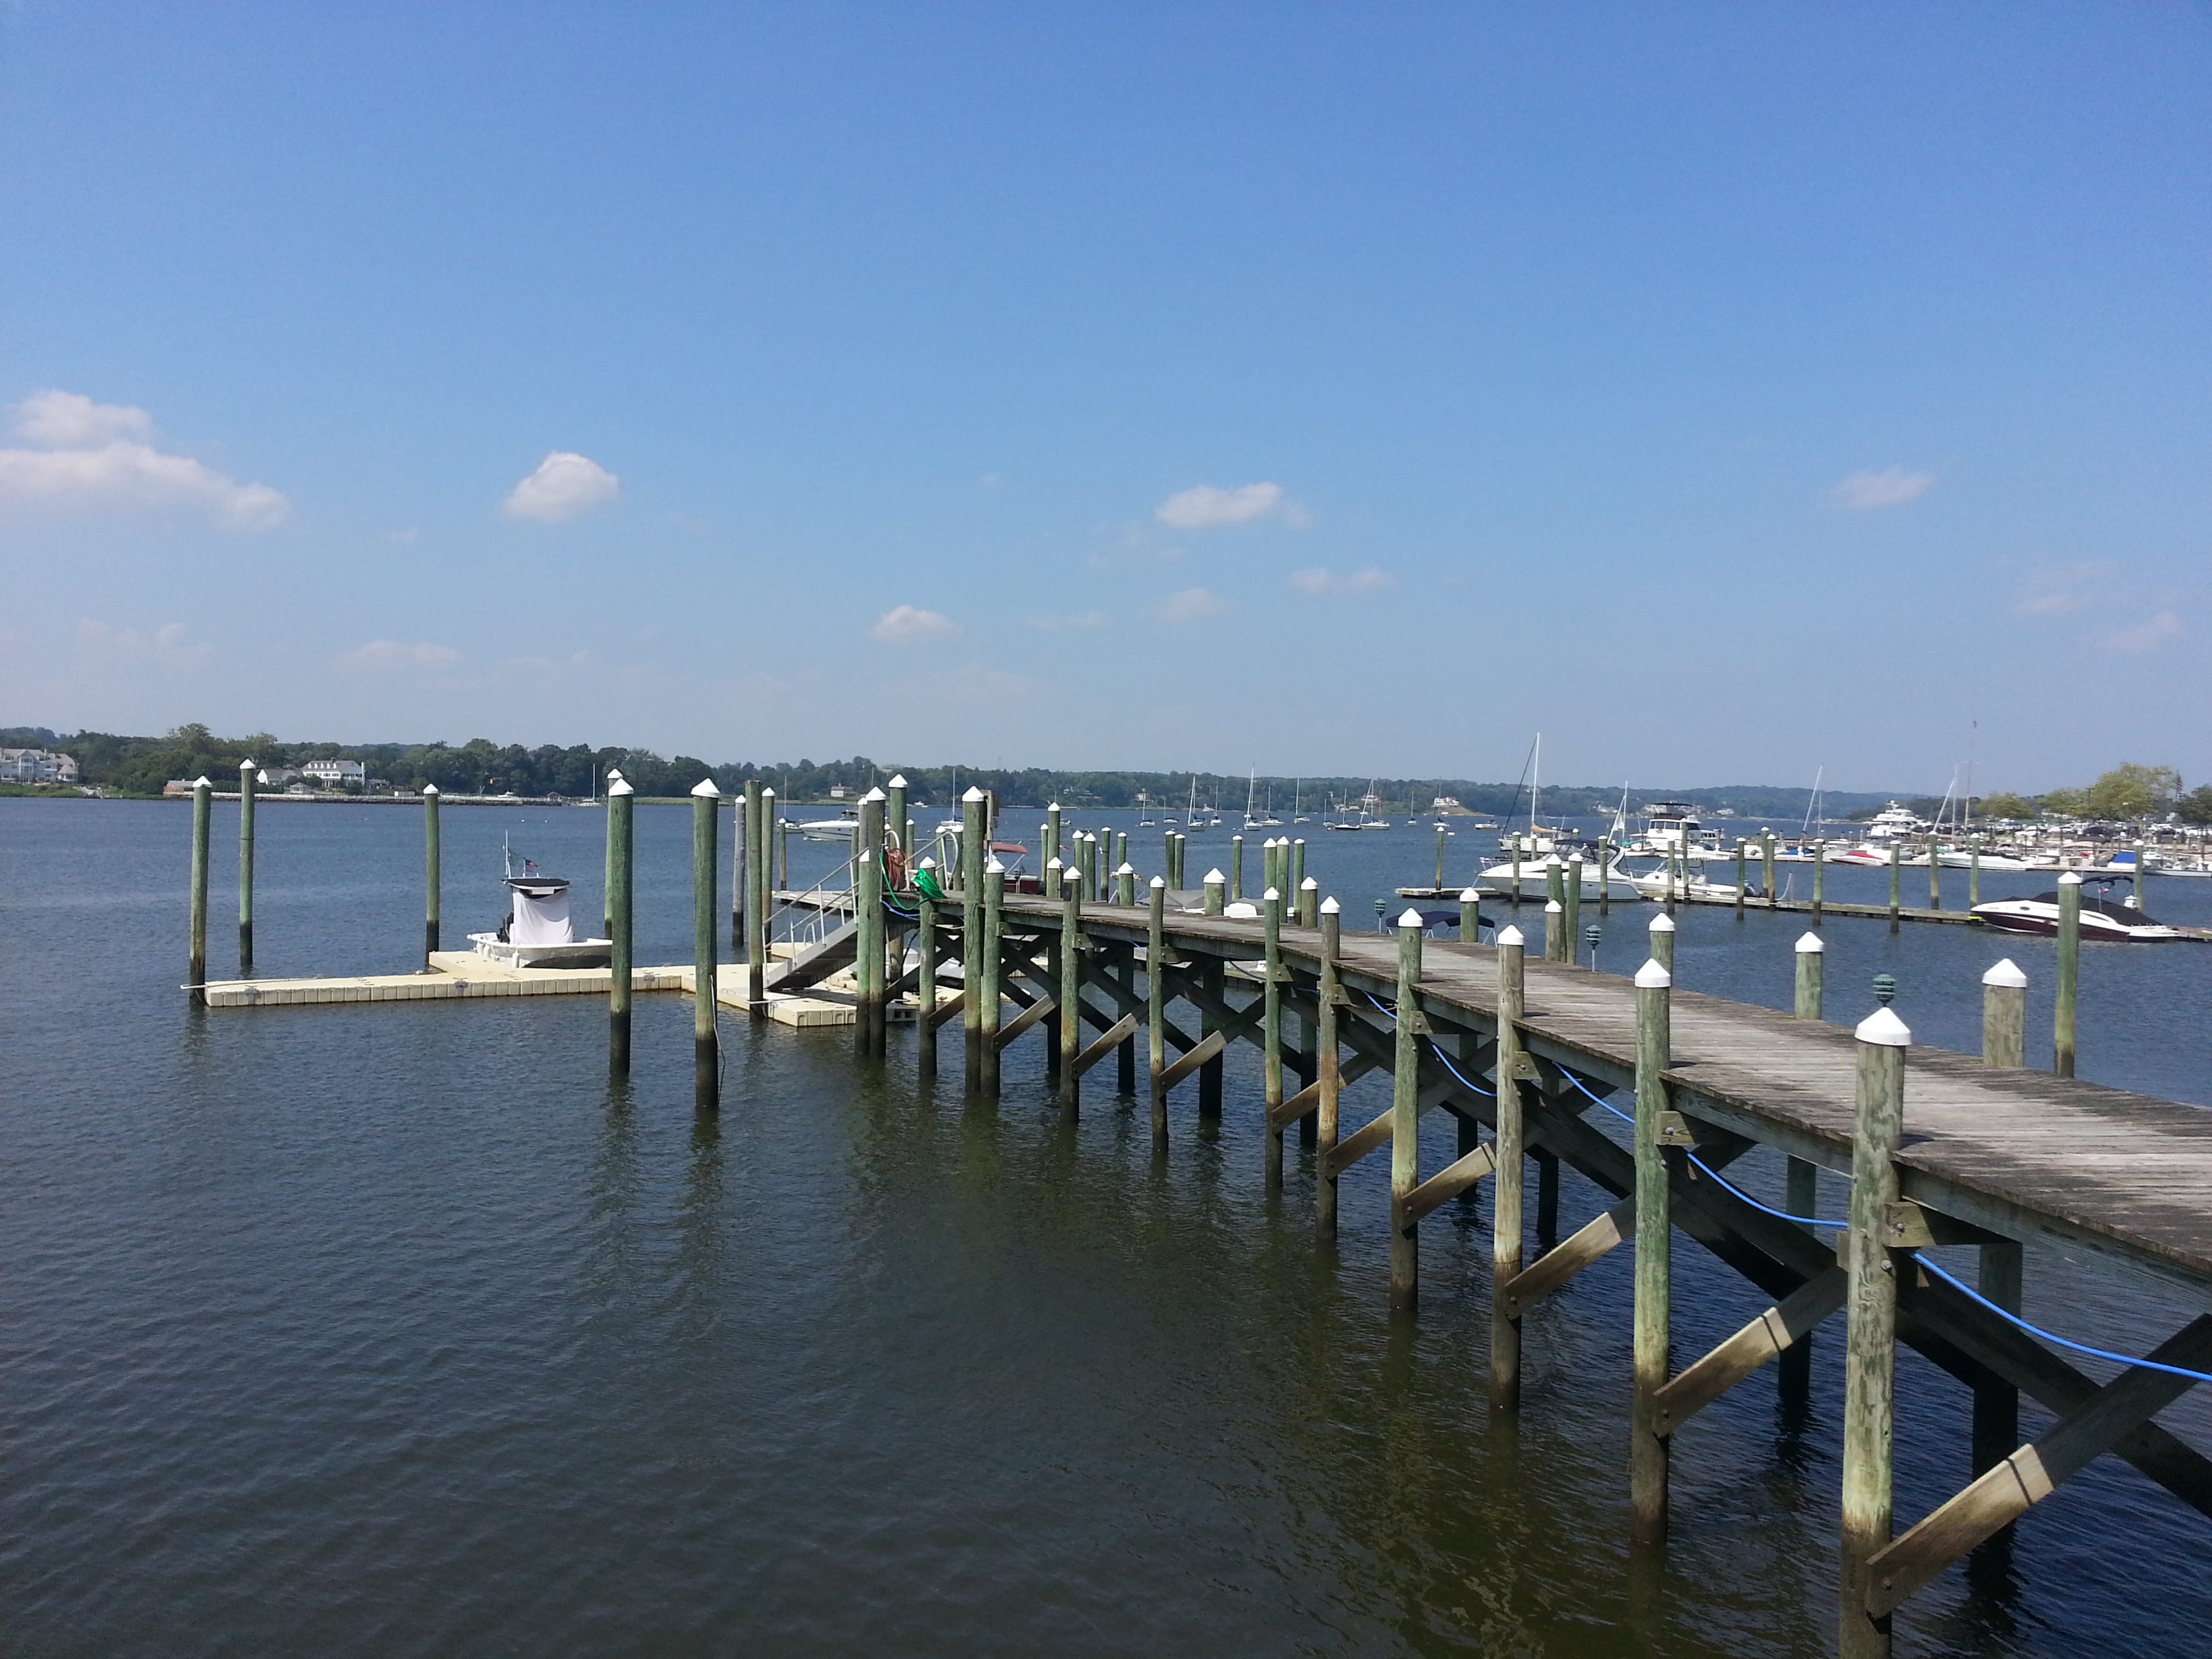 Located on the Navesink River, Corinthian Cove has a boat dock with deeded slips for some units.